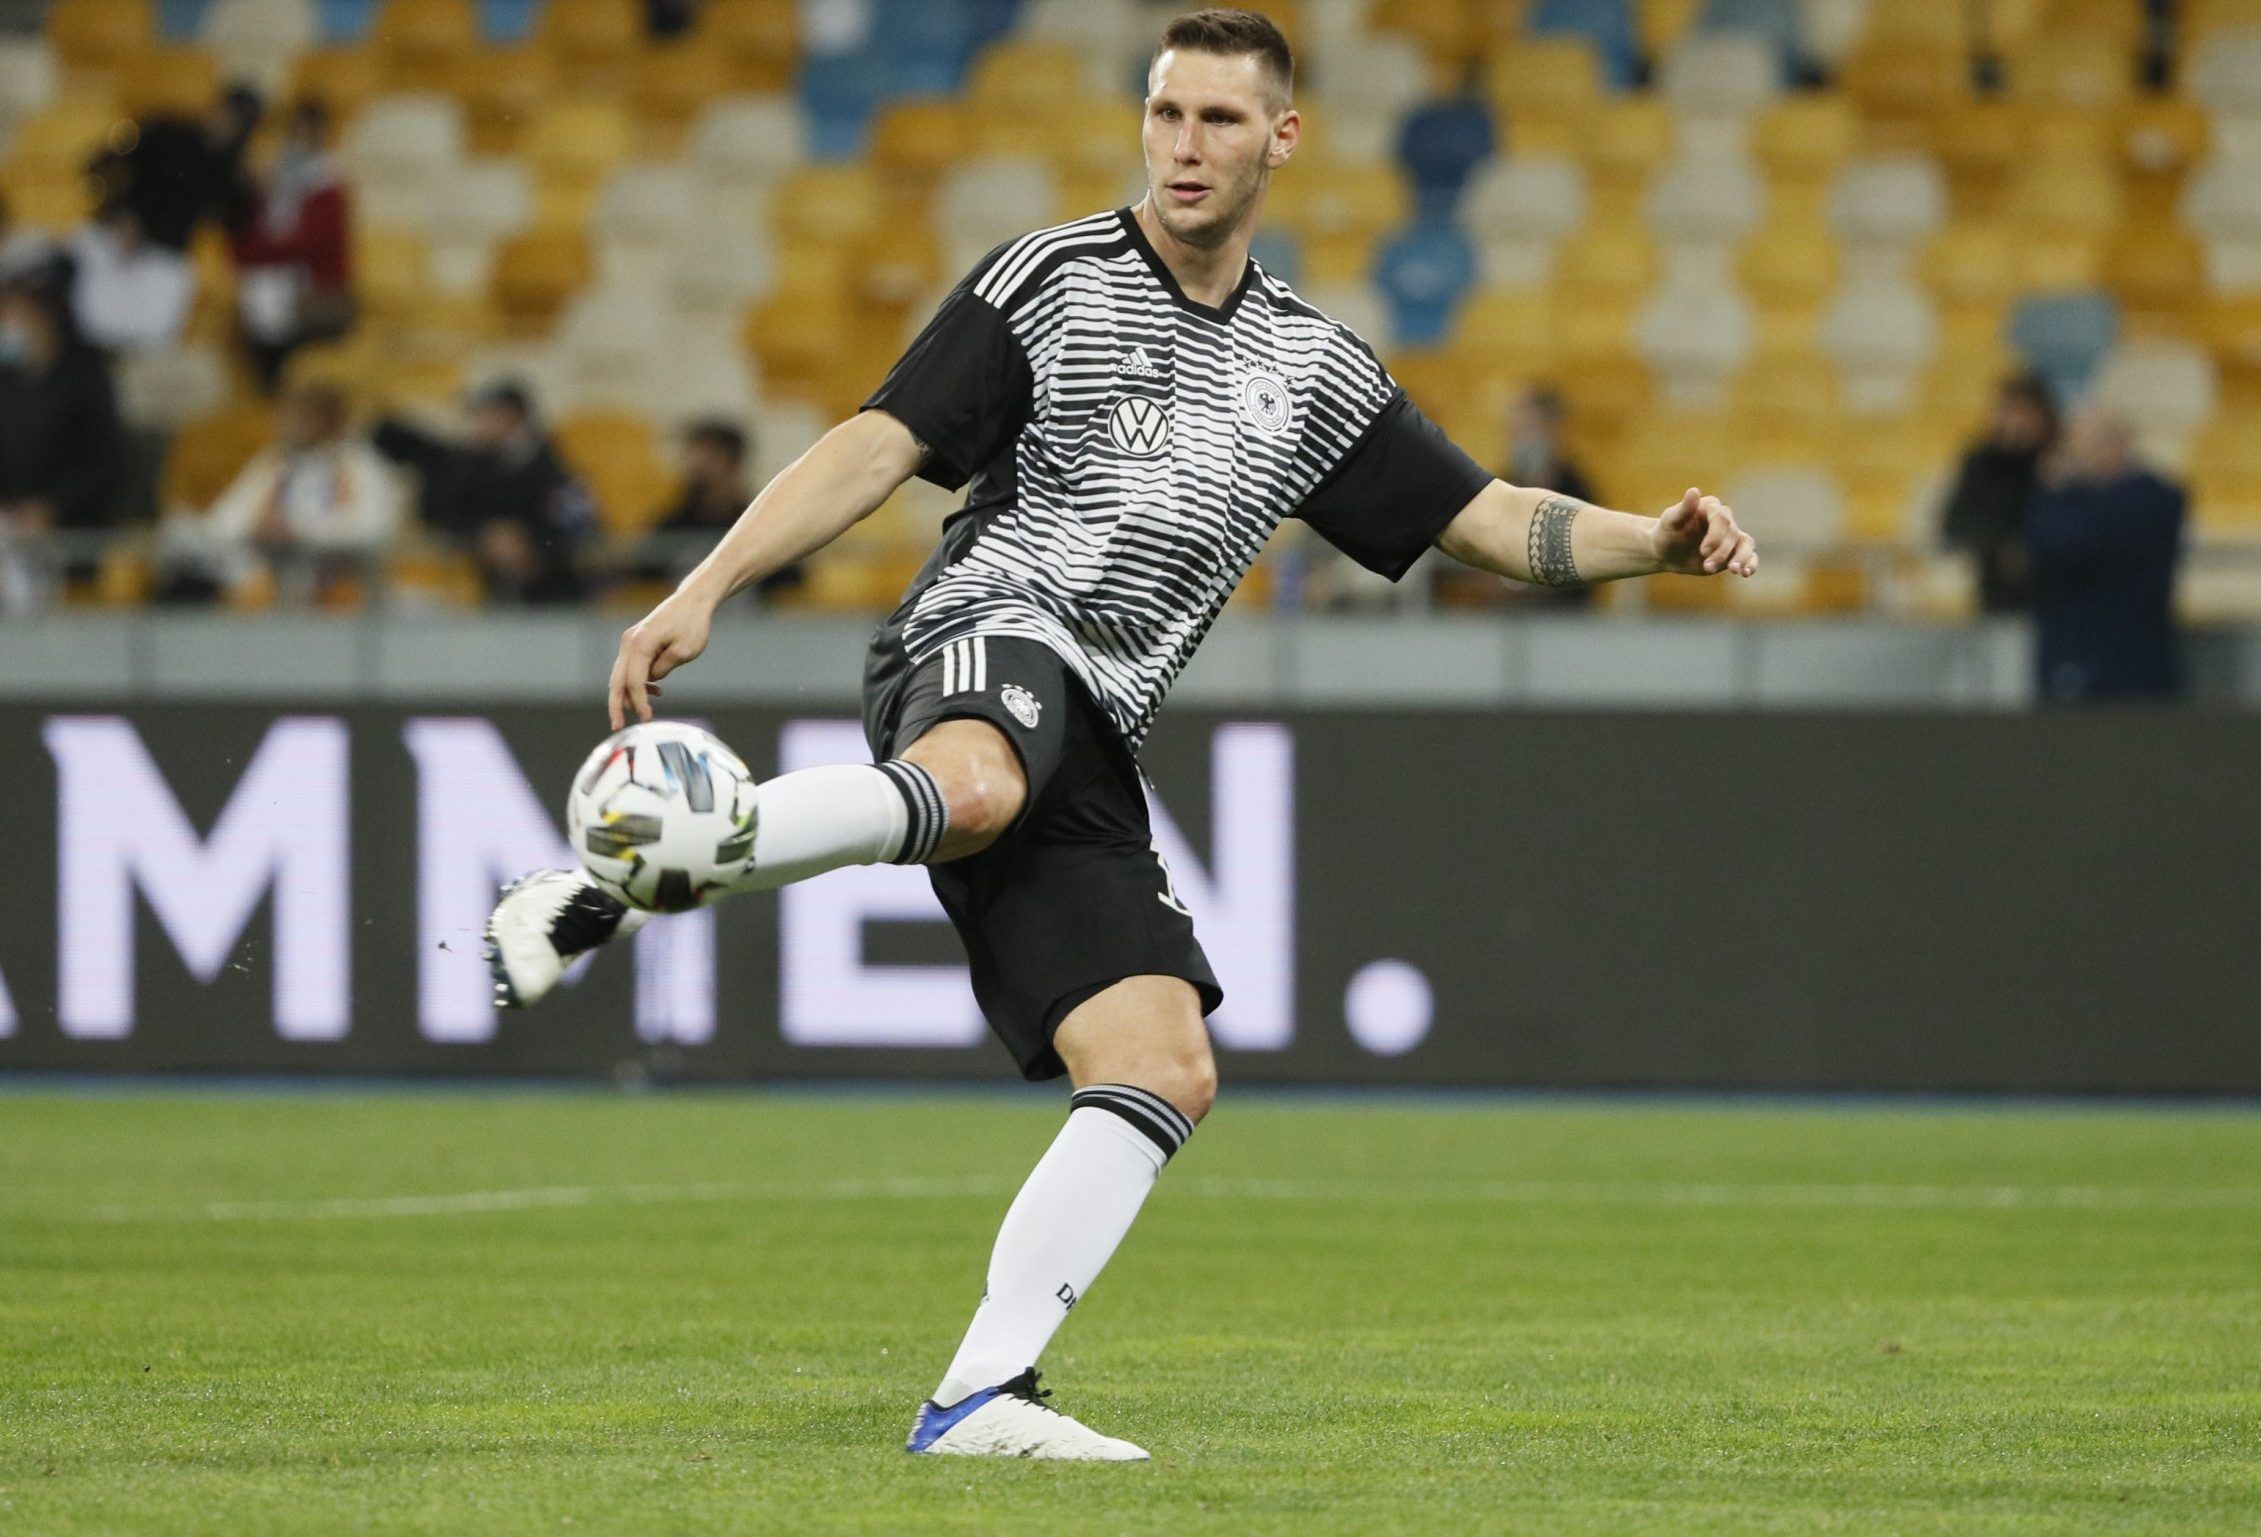 Germany and Bayern Munich defender Niklas Sule during warm up against Ukraine UEFA Nations League